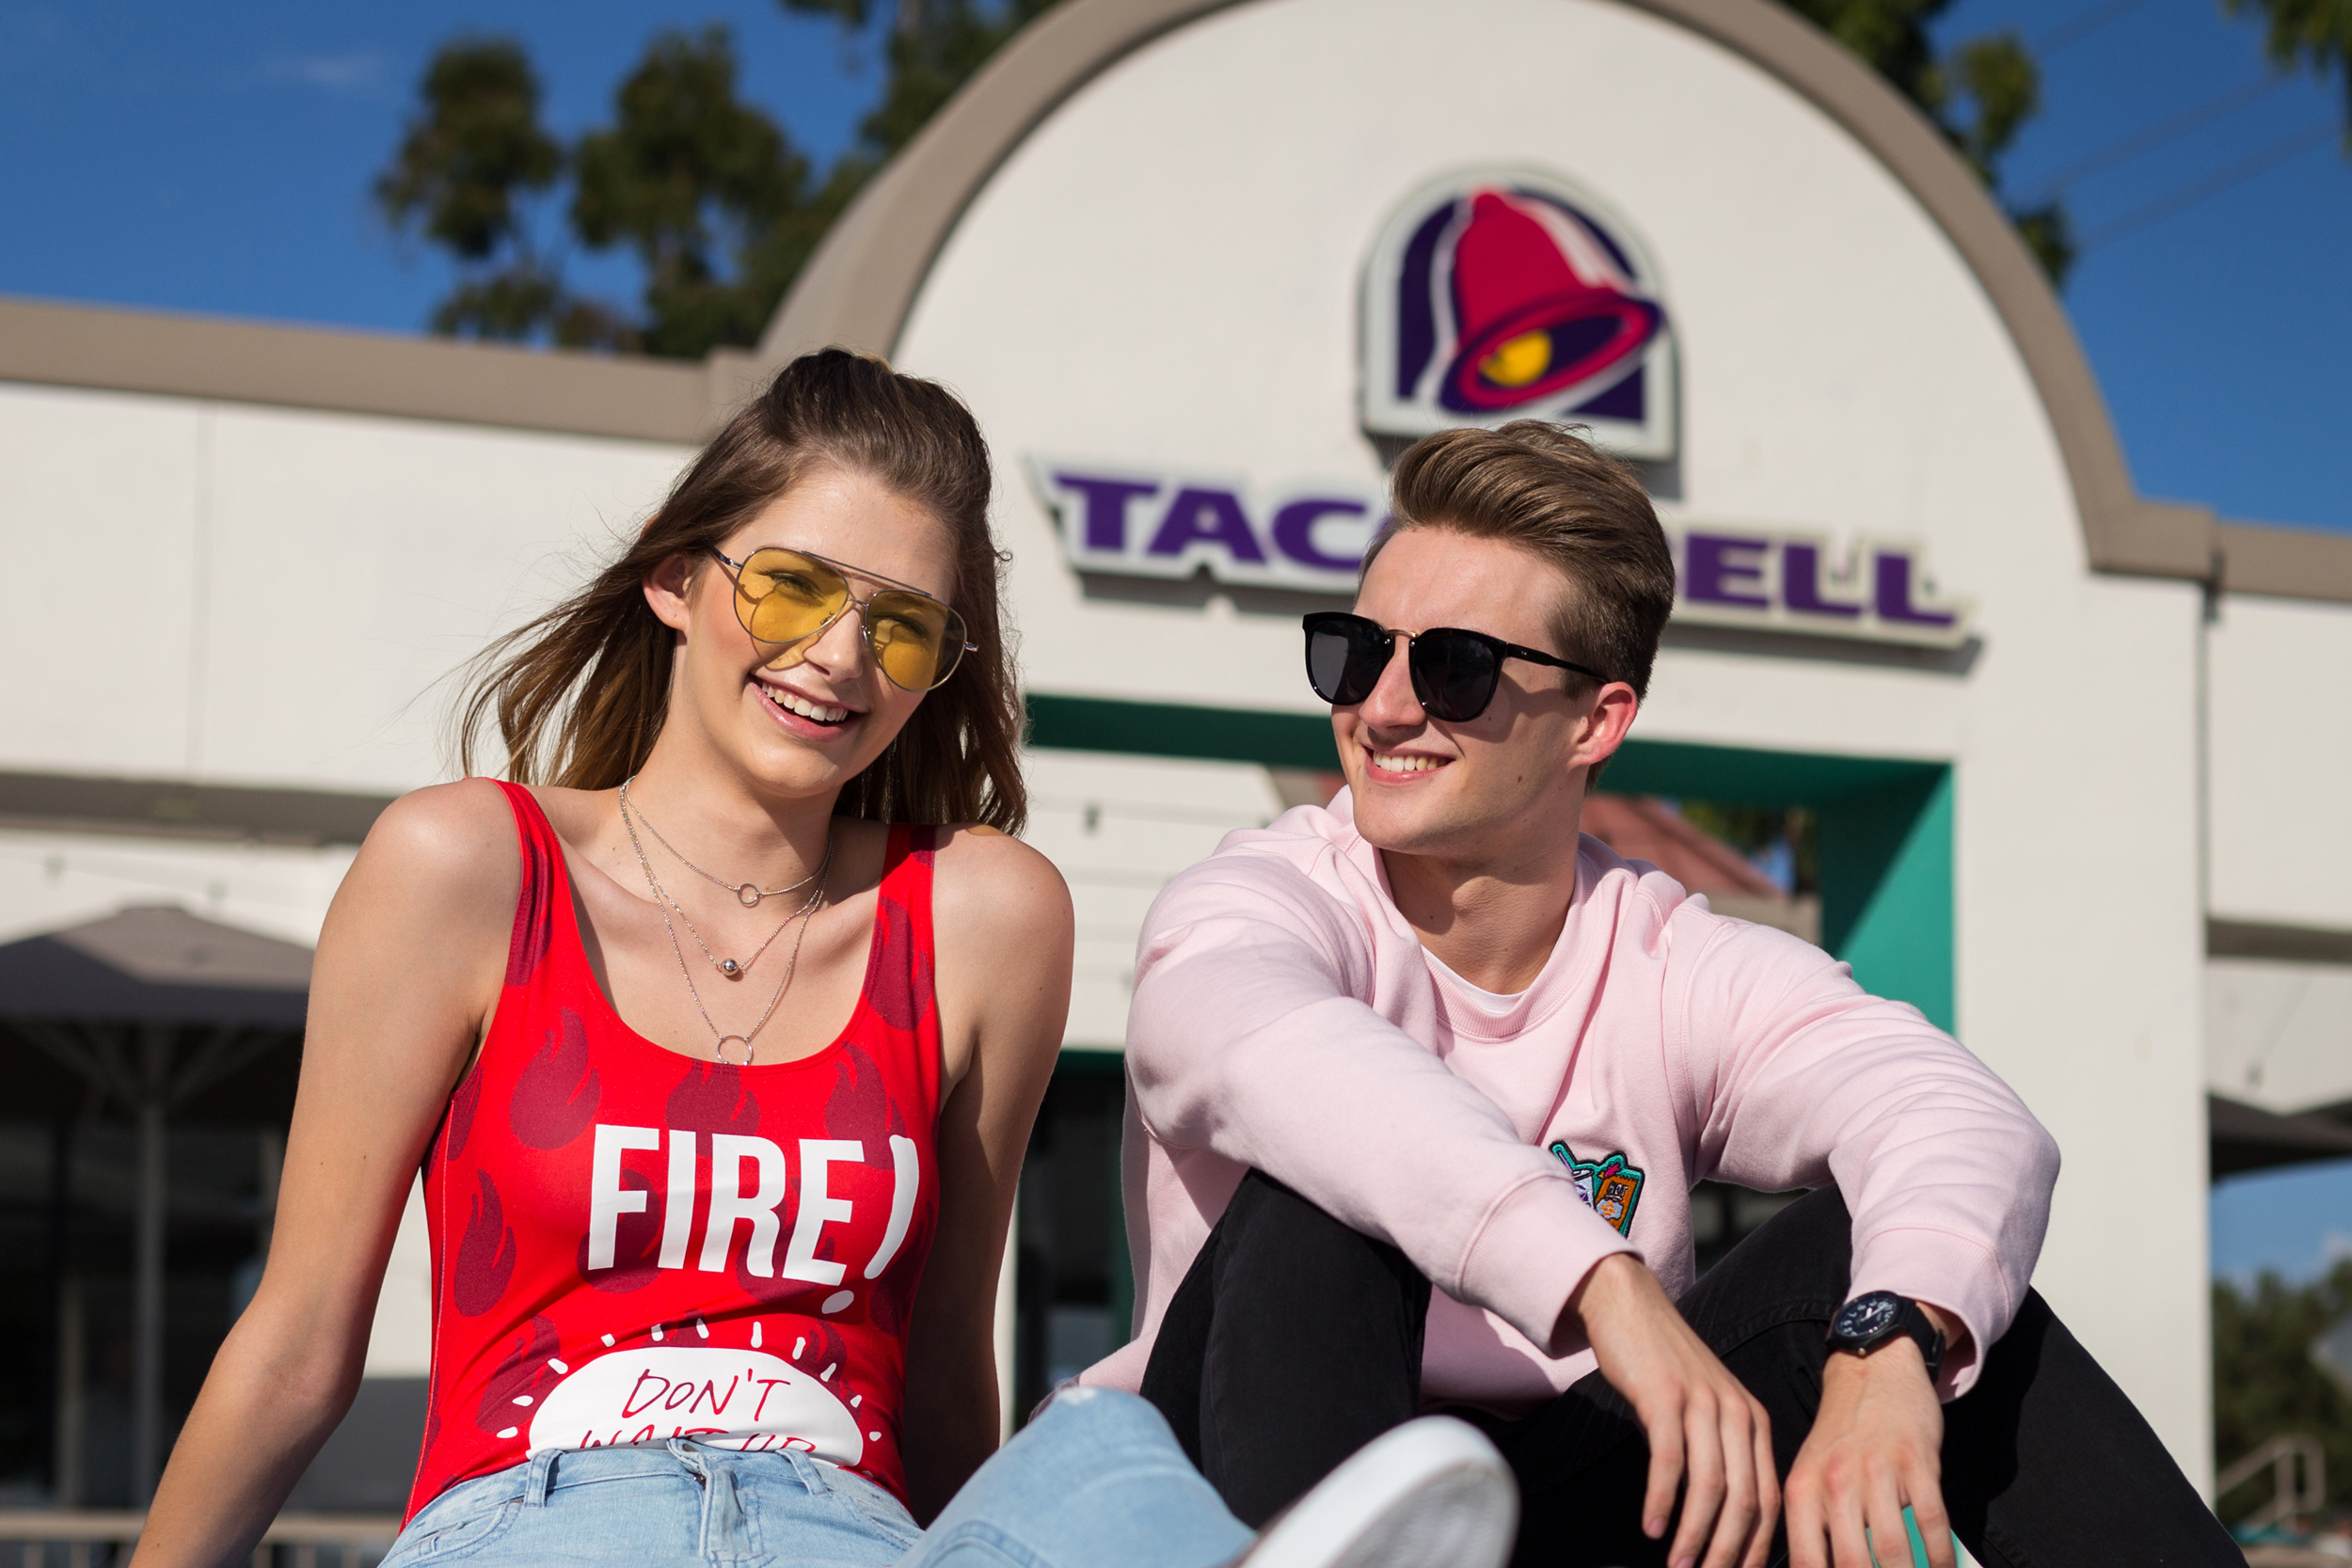 PHOTO: Forever 21 and Taco Bell's new limited edition clothing line is available in stores and online.